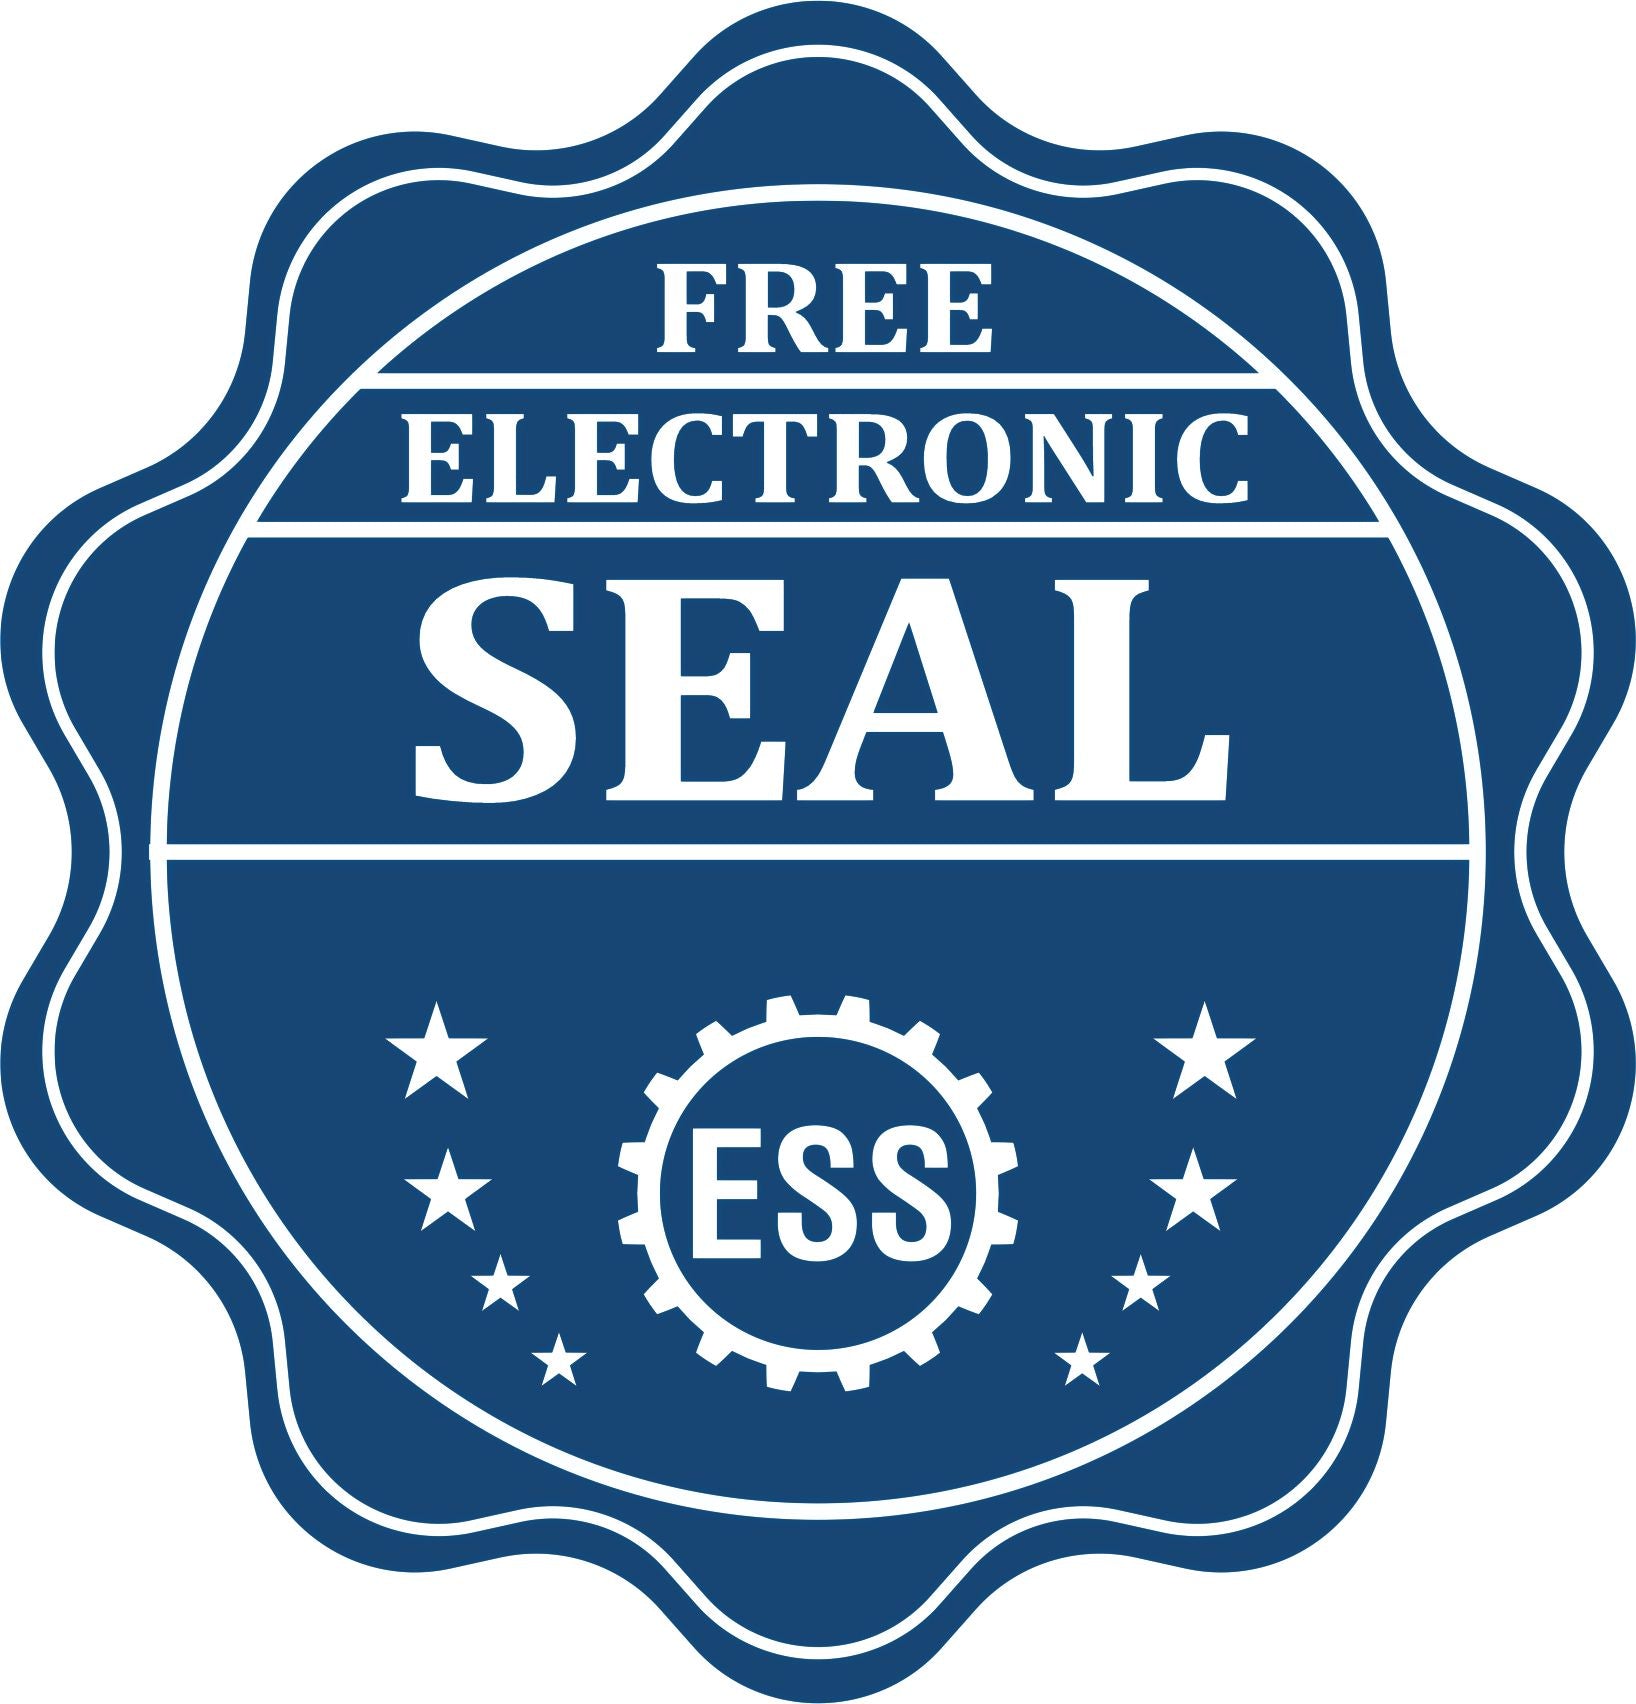 A badge showing a free electronic seal for the Slim Pre-Inked Idaho Professional Engineer Seal Stamp with stars and the ESS gear on the emblem.